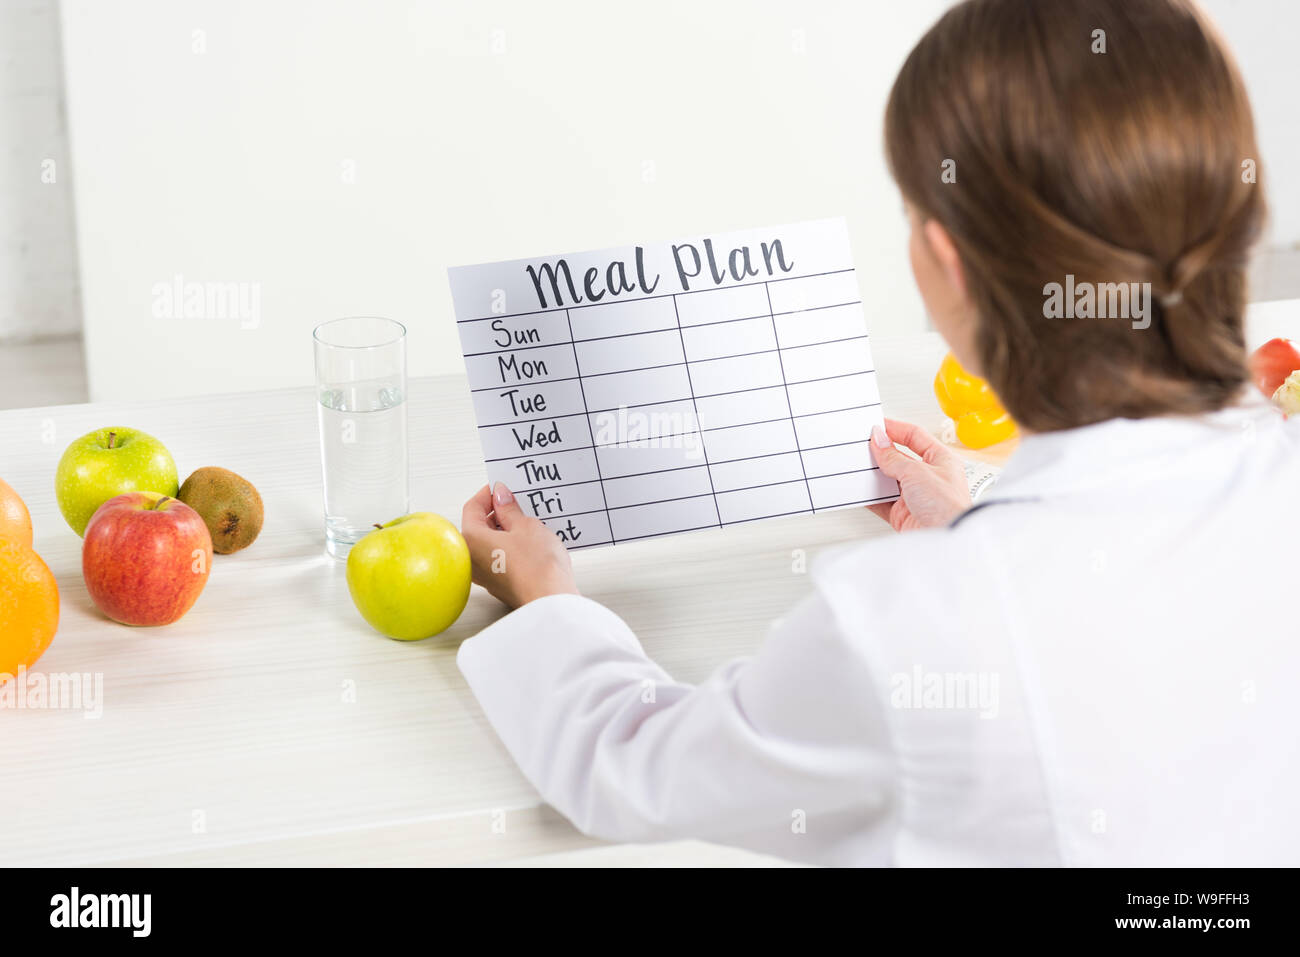 back view of dietitian holding meal plan at workplace Stock Photo